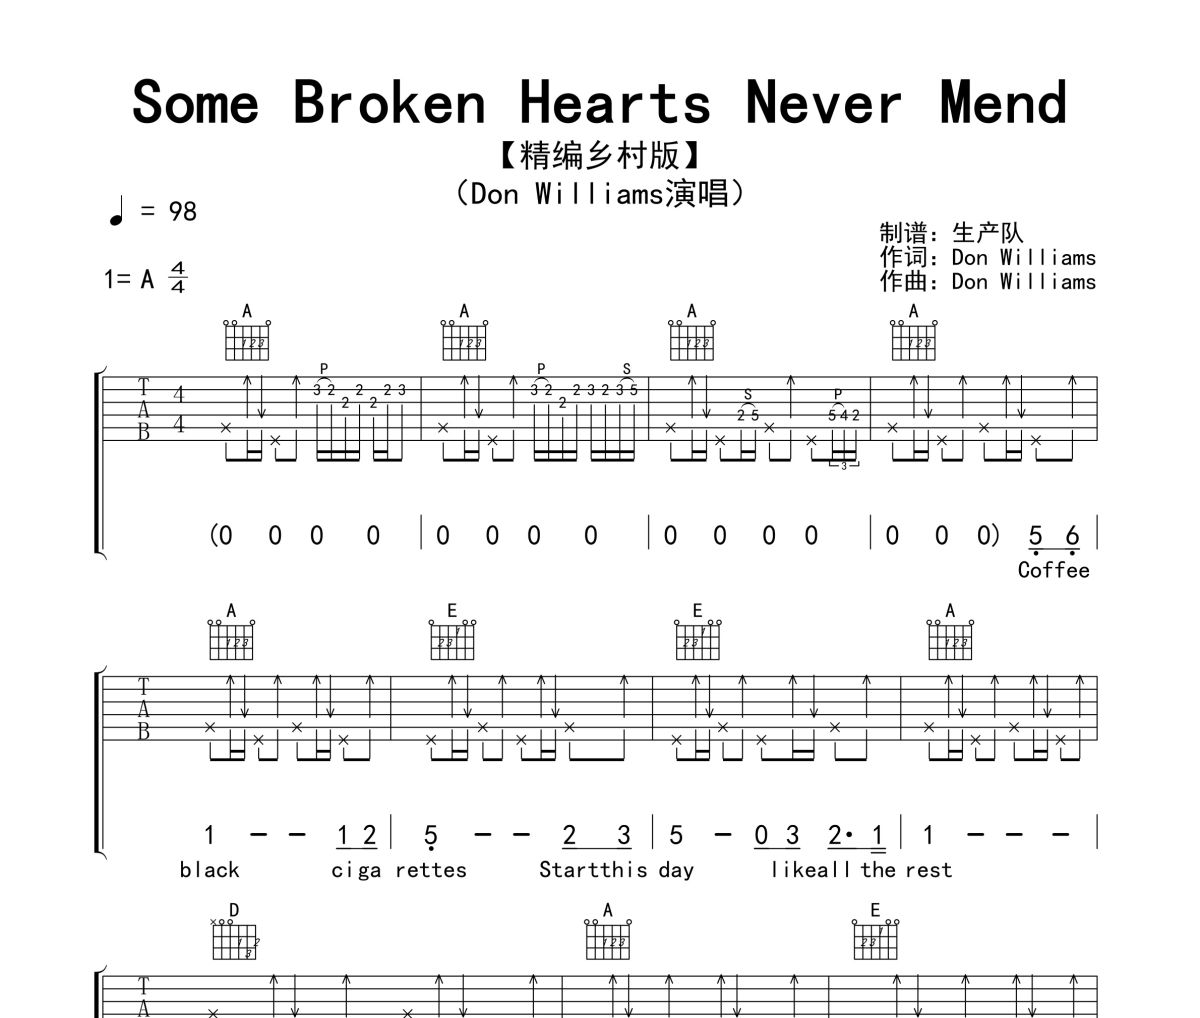 Some Broken Hearts Never Mend吉他谱 Don Williams《Some Broken He